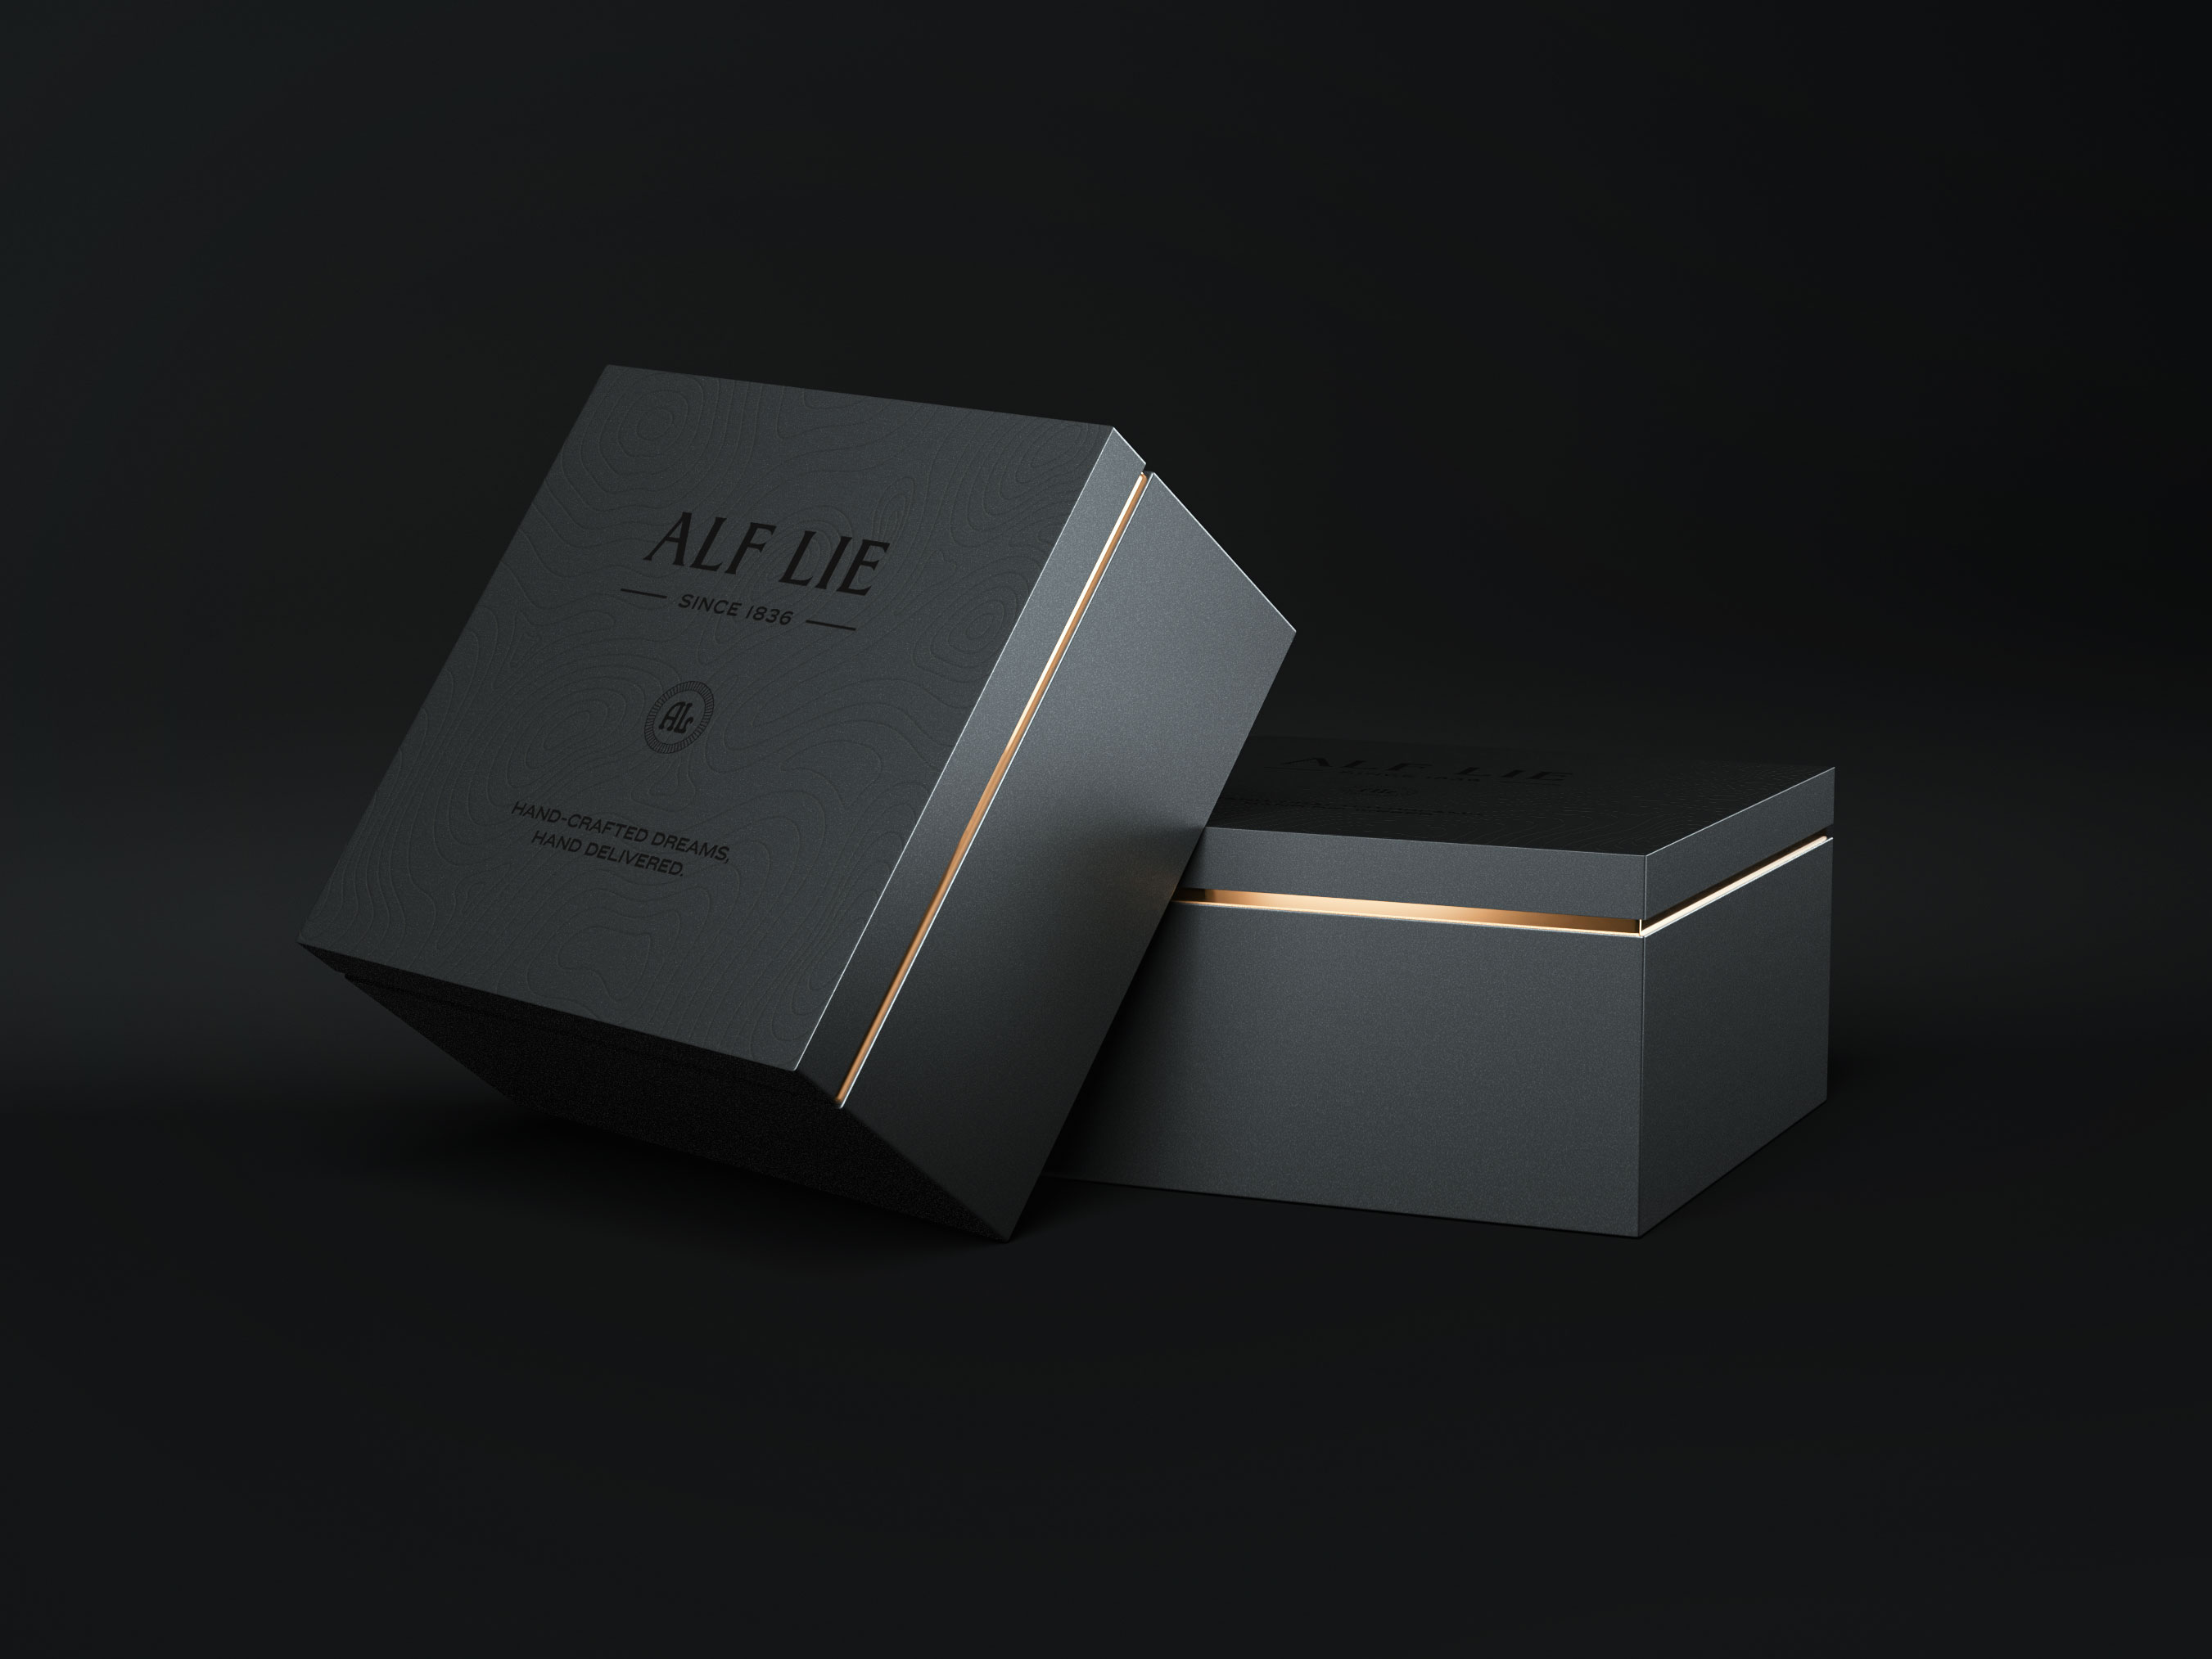 An image of presentation packaging to hold an Alf Lie watch.